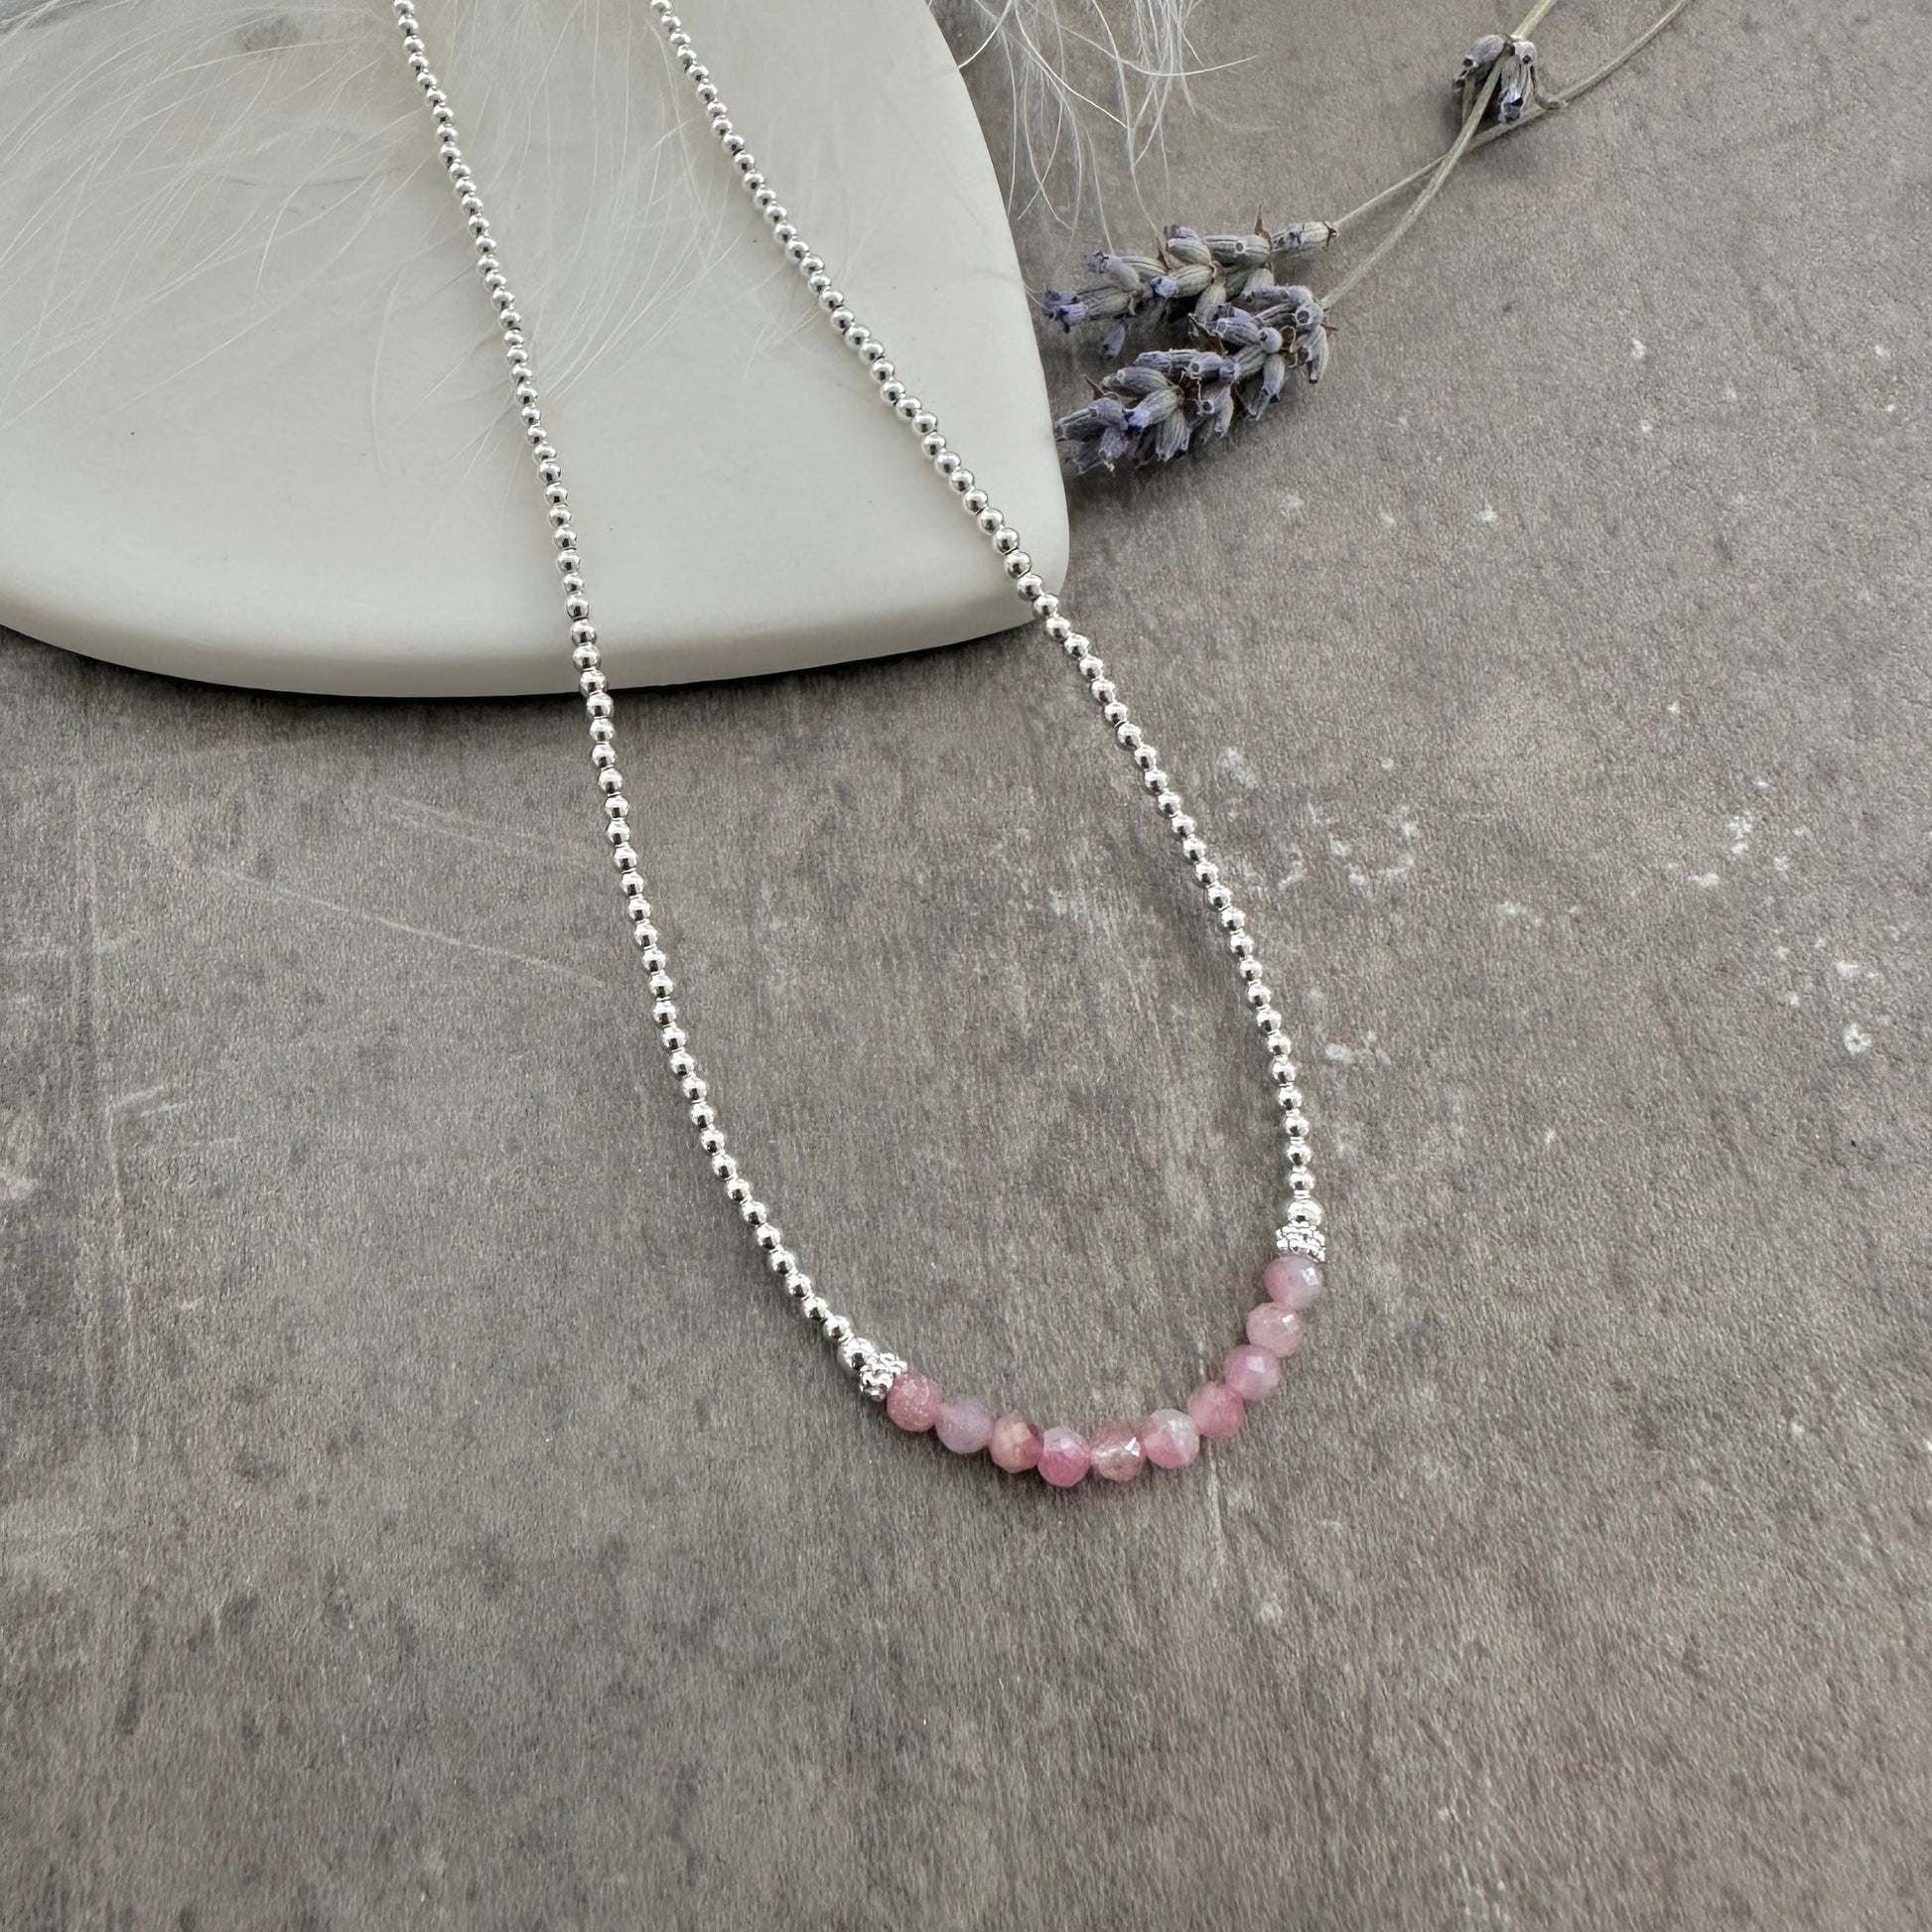 Thin Pale Pink Tourmaline and Sterling Silver Bead Necklace, October Birthstone, dainty silver necklace